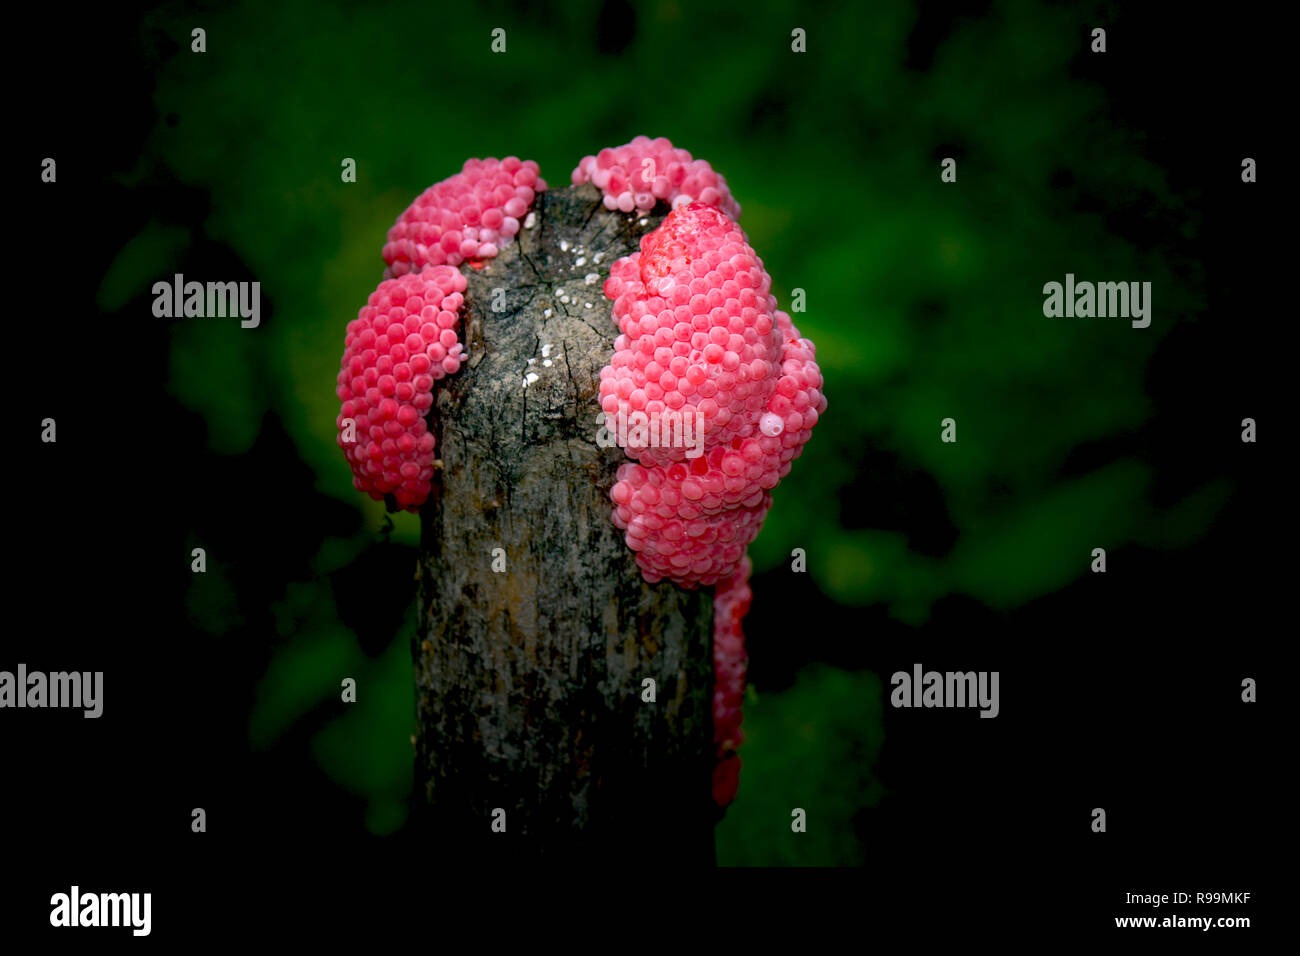 Close up on Channeled Apple Snail eggs (Pomacea Canaliculata). Stock Photo